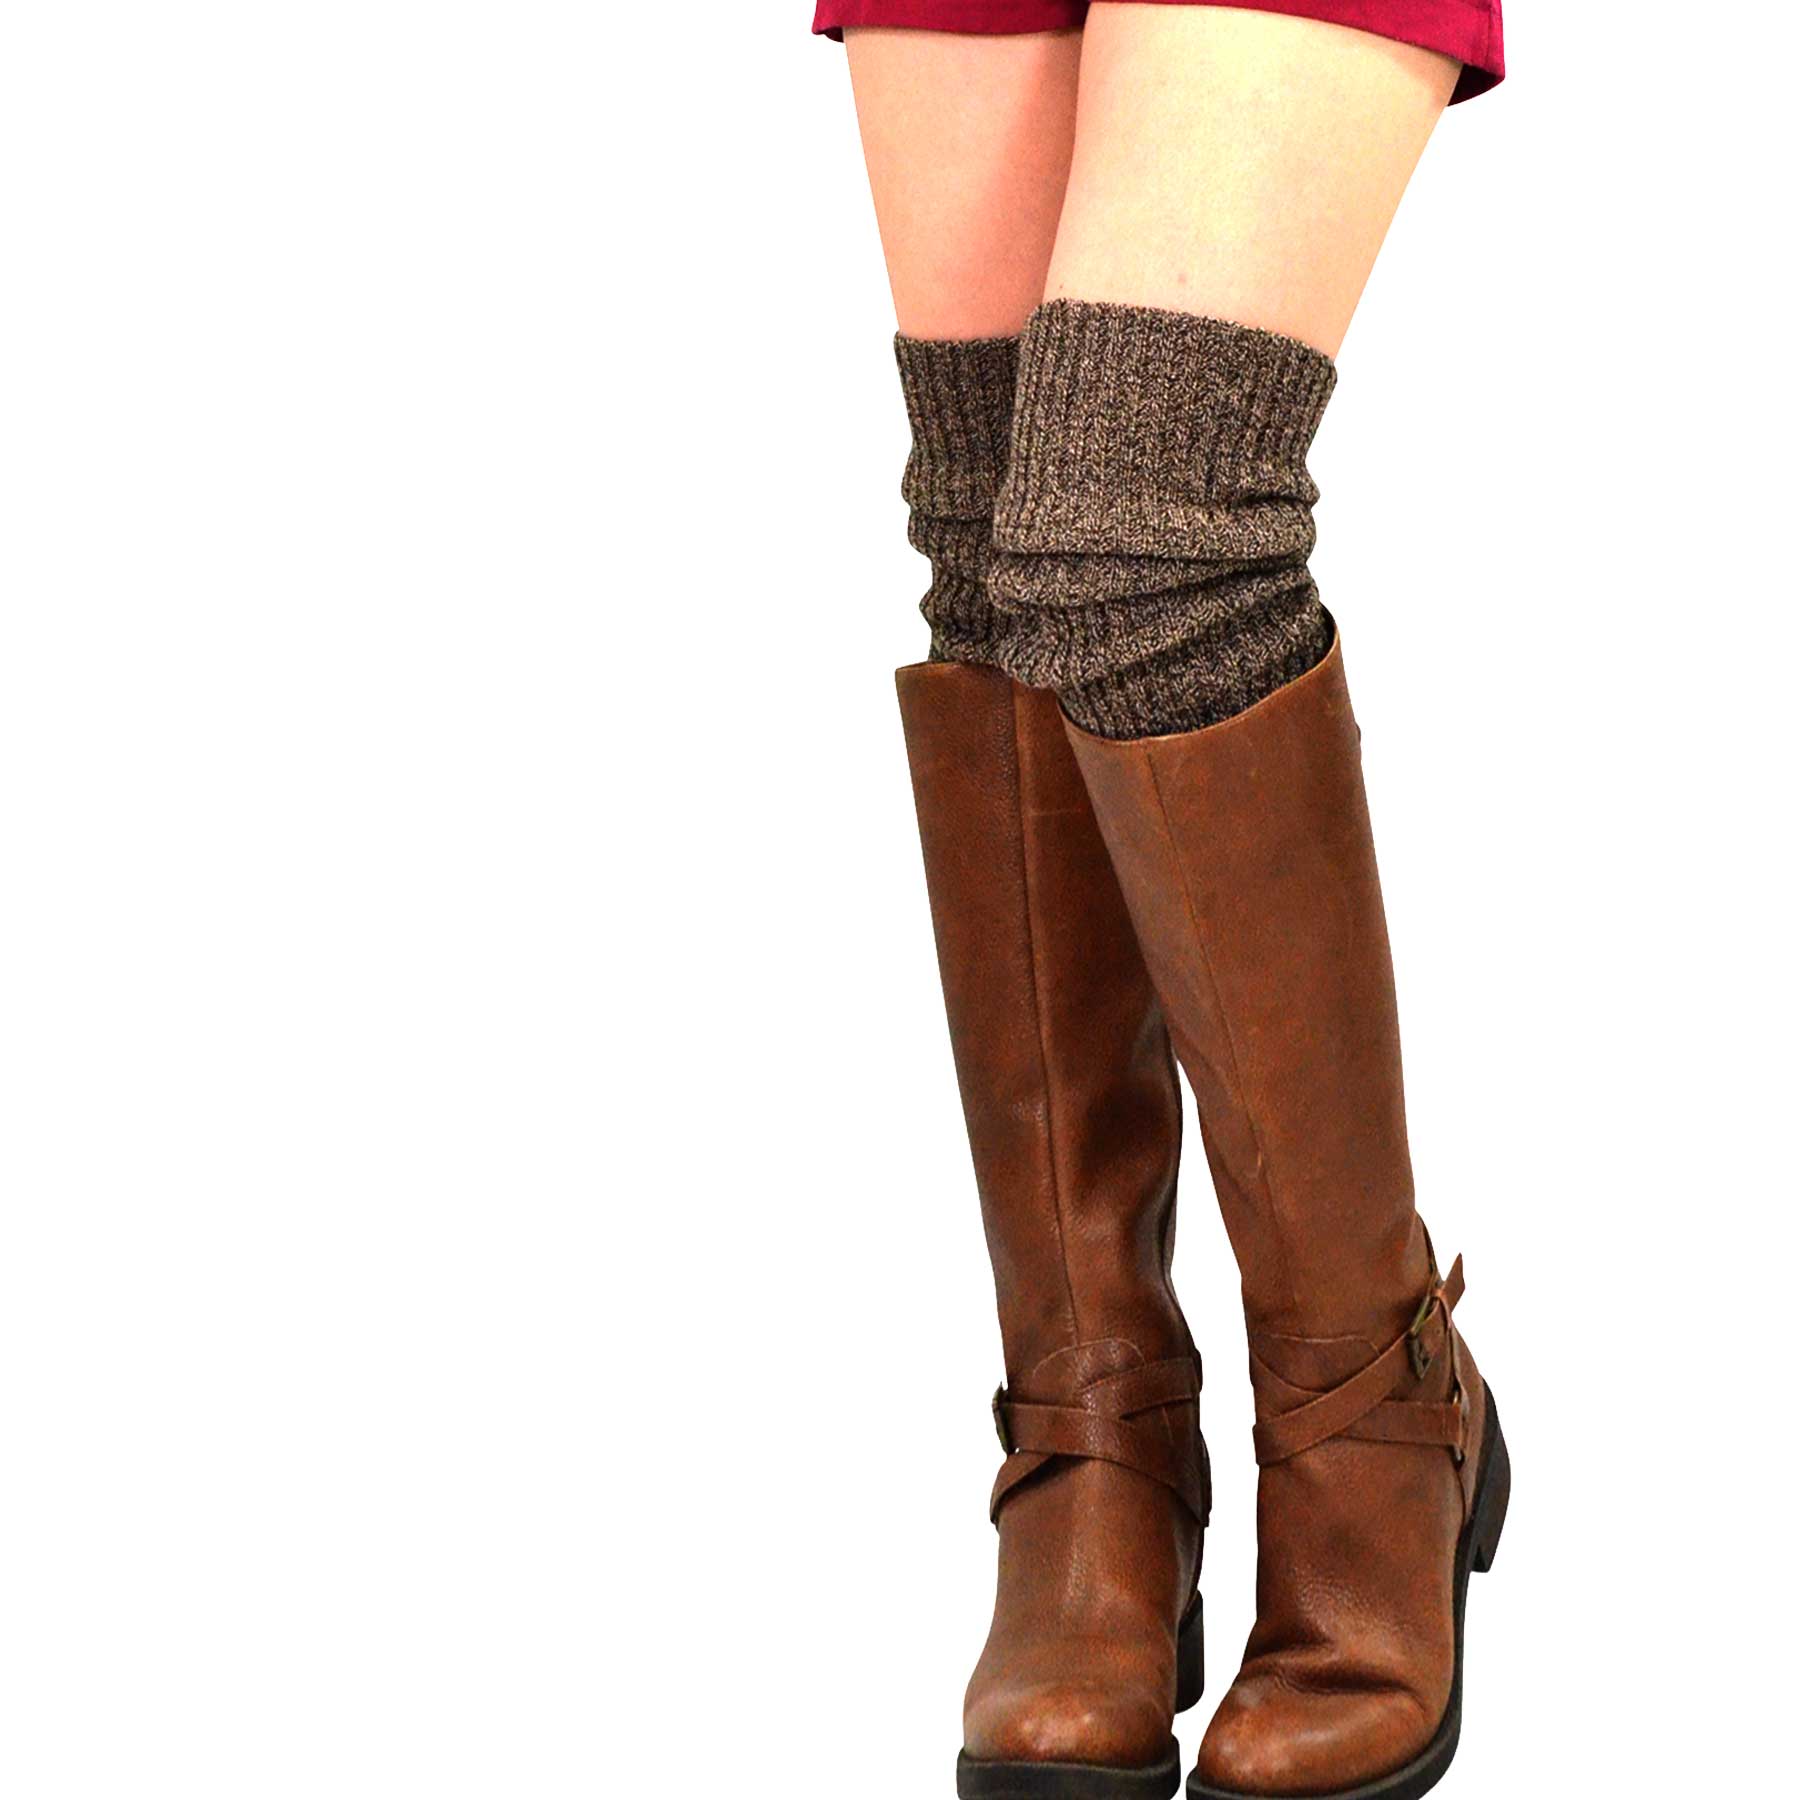 Adult Acrylic Knee High Leg Warmers - More Colors - Candy Apple